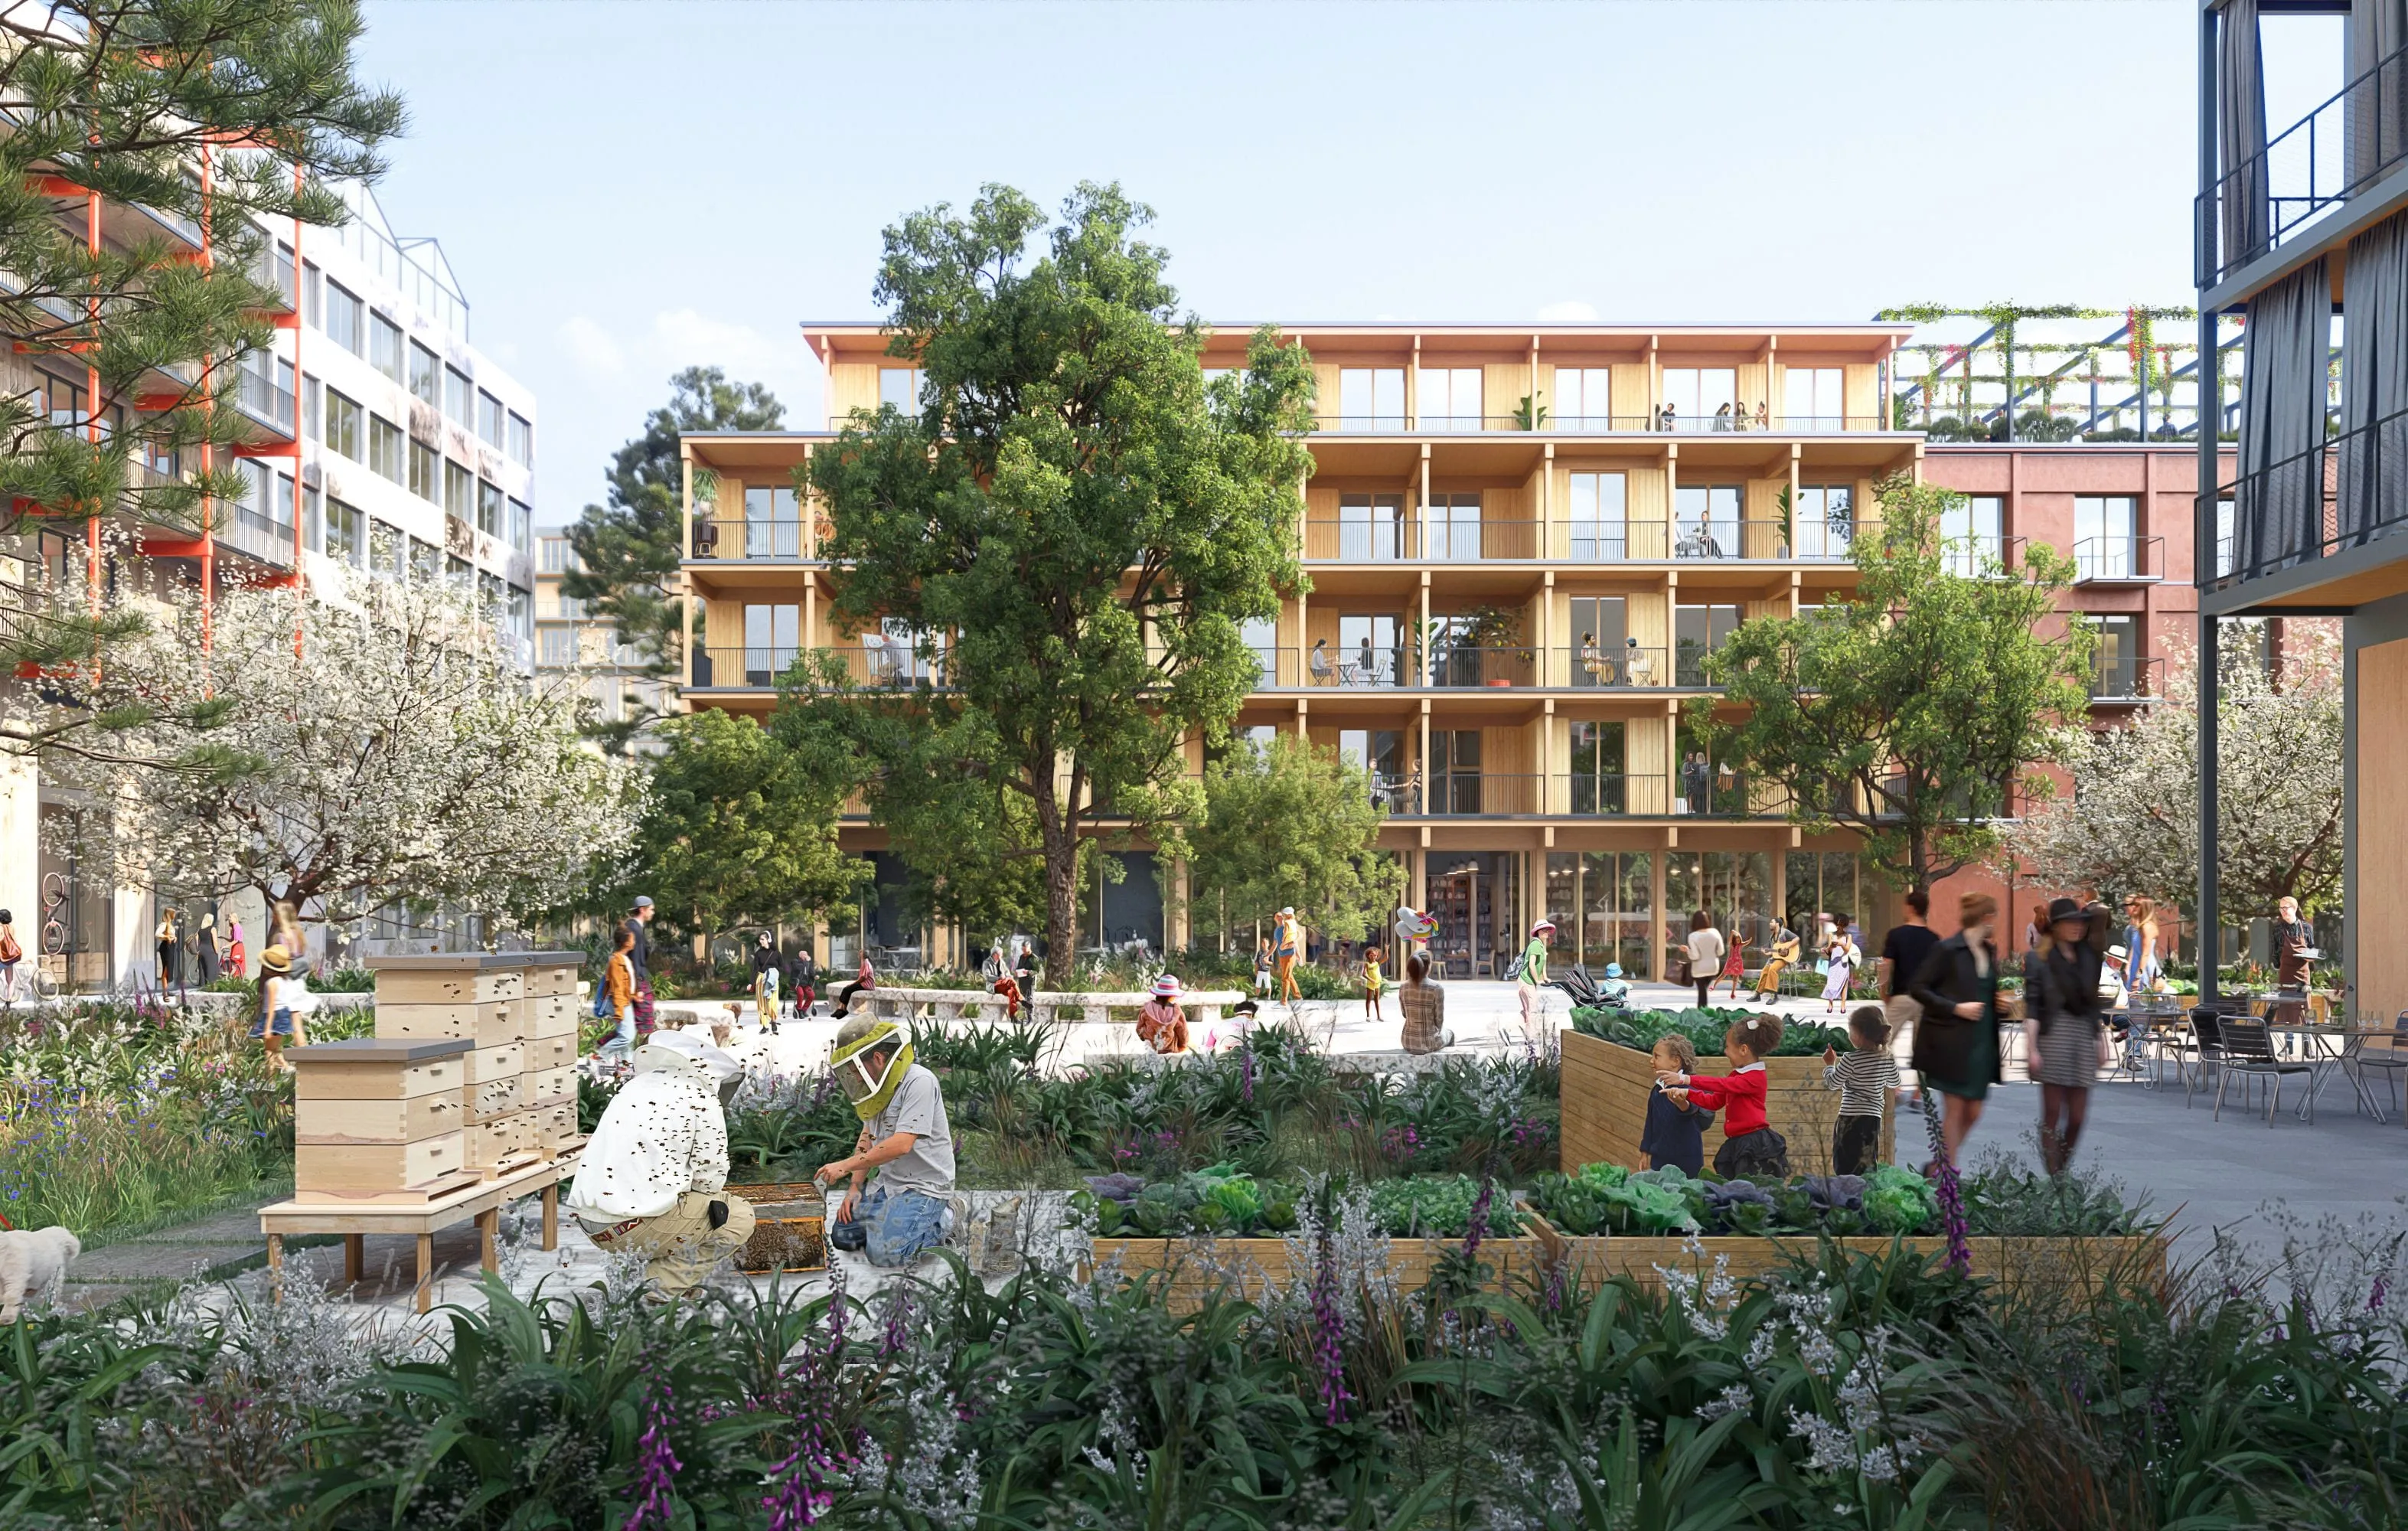 Multistory Timber Building with a lively neighborhood